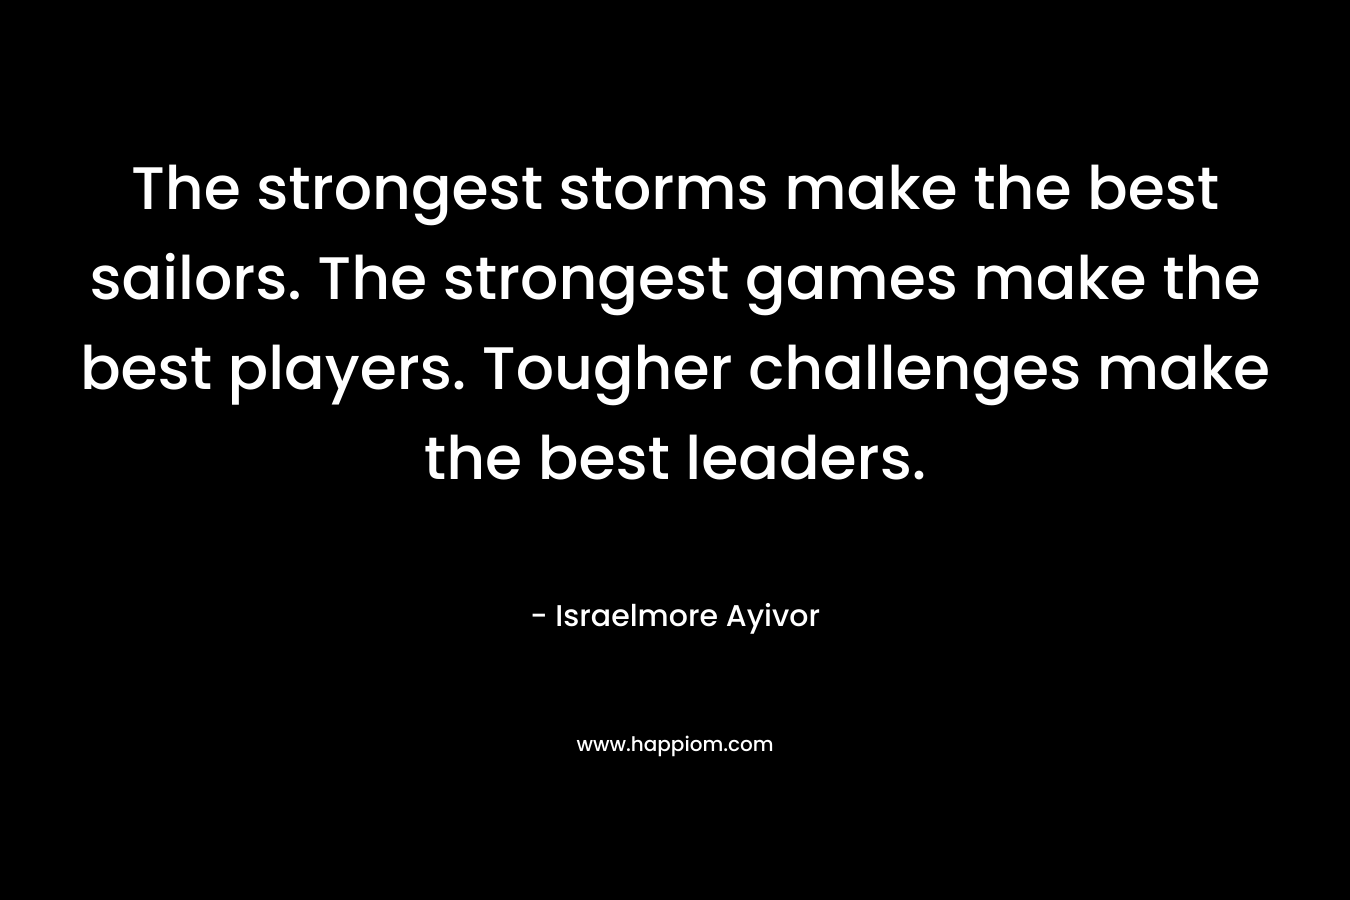 The strongest storms make the best sailors. The strongest games make the best players. Tougher challenges make the best leaders. – Israelmore Ayivor